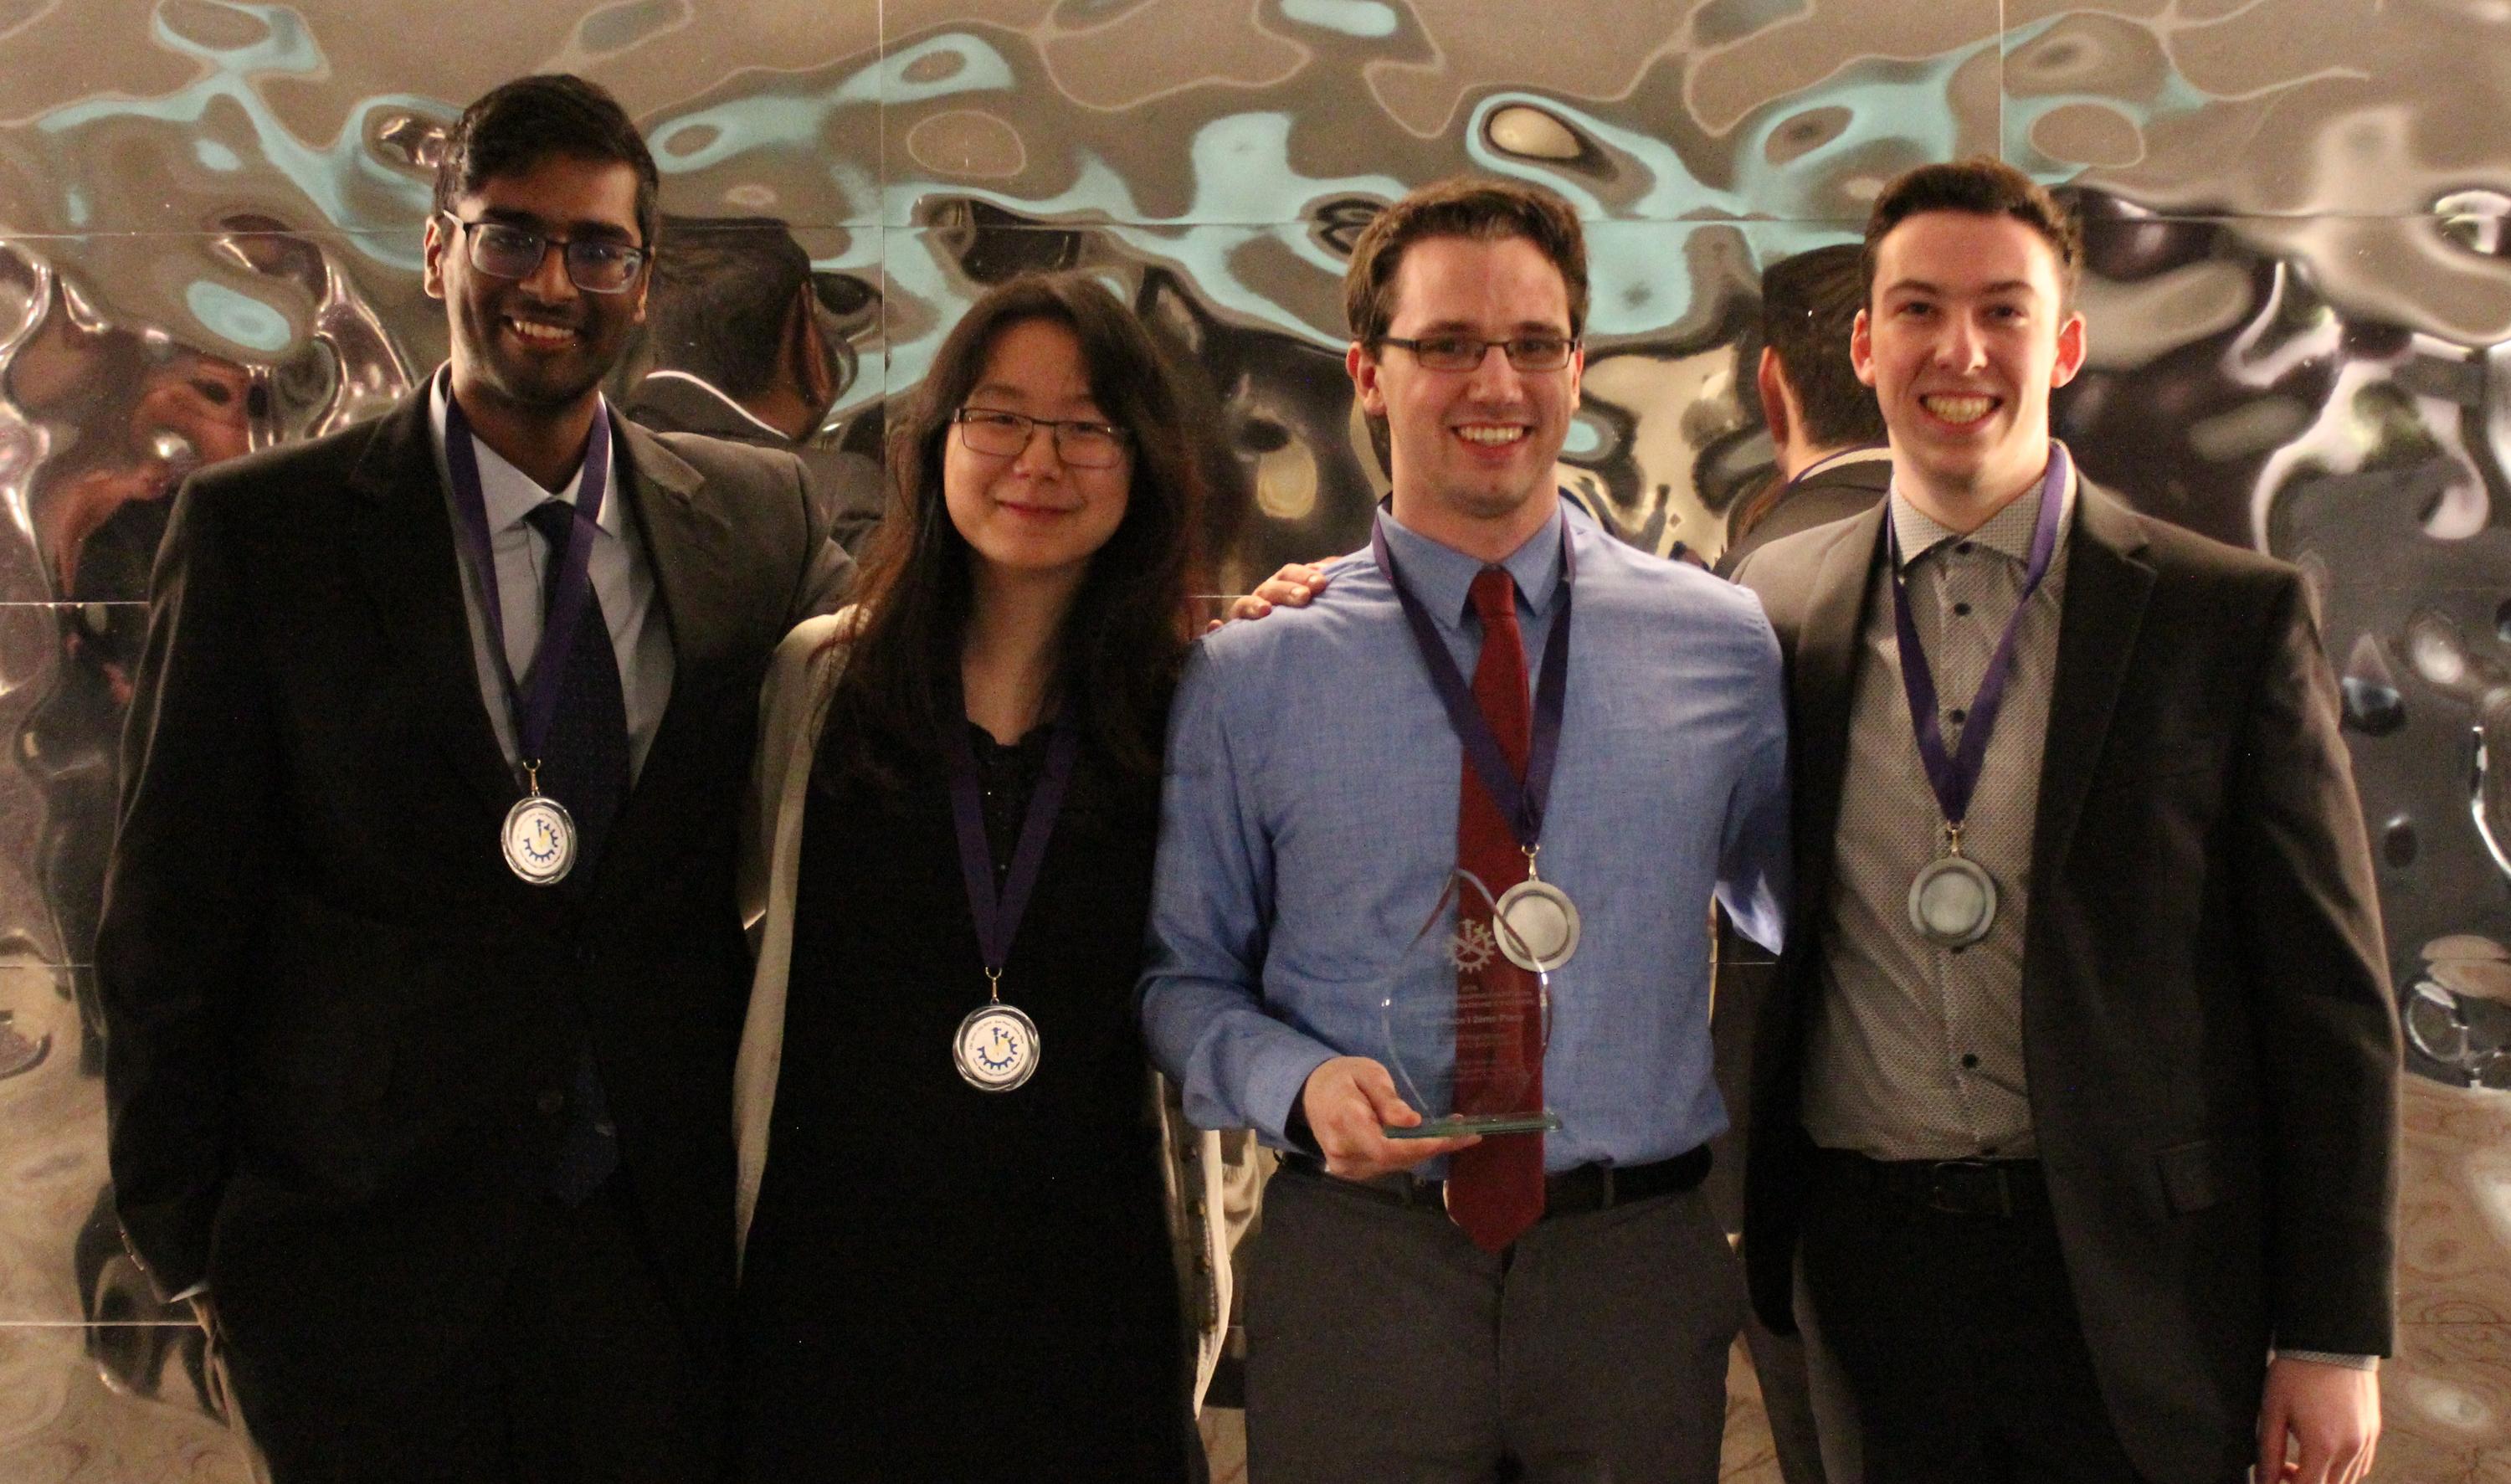 Waterloo Engineering teammates (left to right) Yuvin Weerasinghe, Jia Xin (Maggie) Han, Patrick Groh and Kripstopher Griffin pose with their prizes at the recent Canadian Engineering Competition.